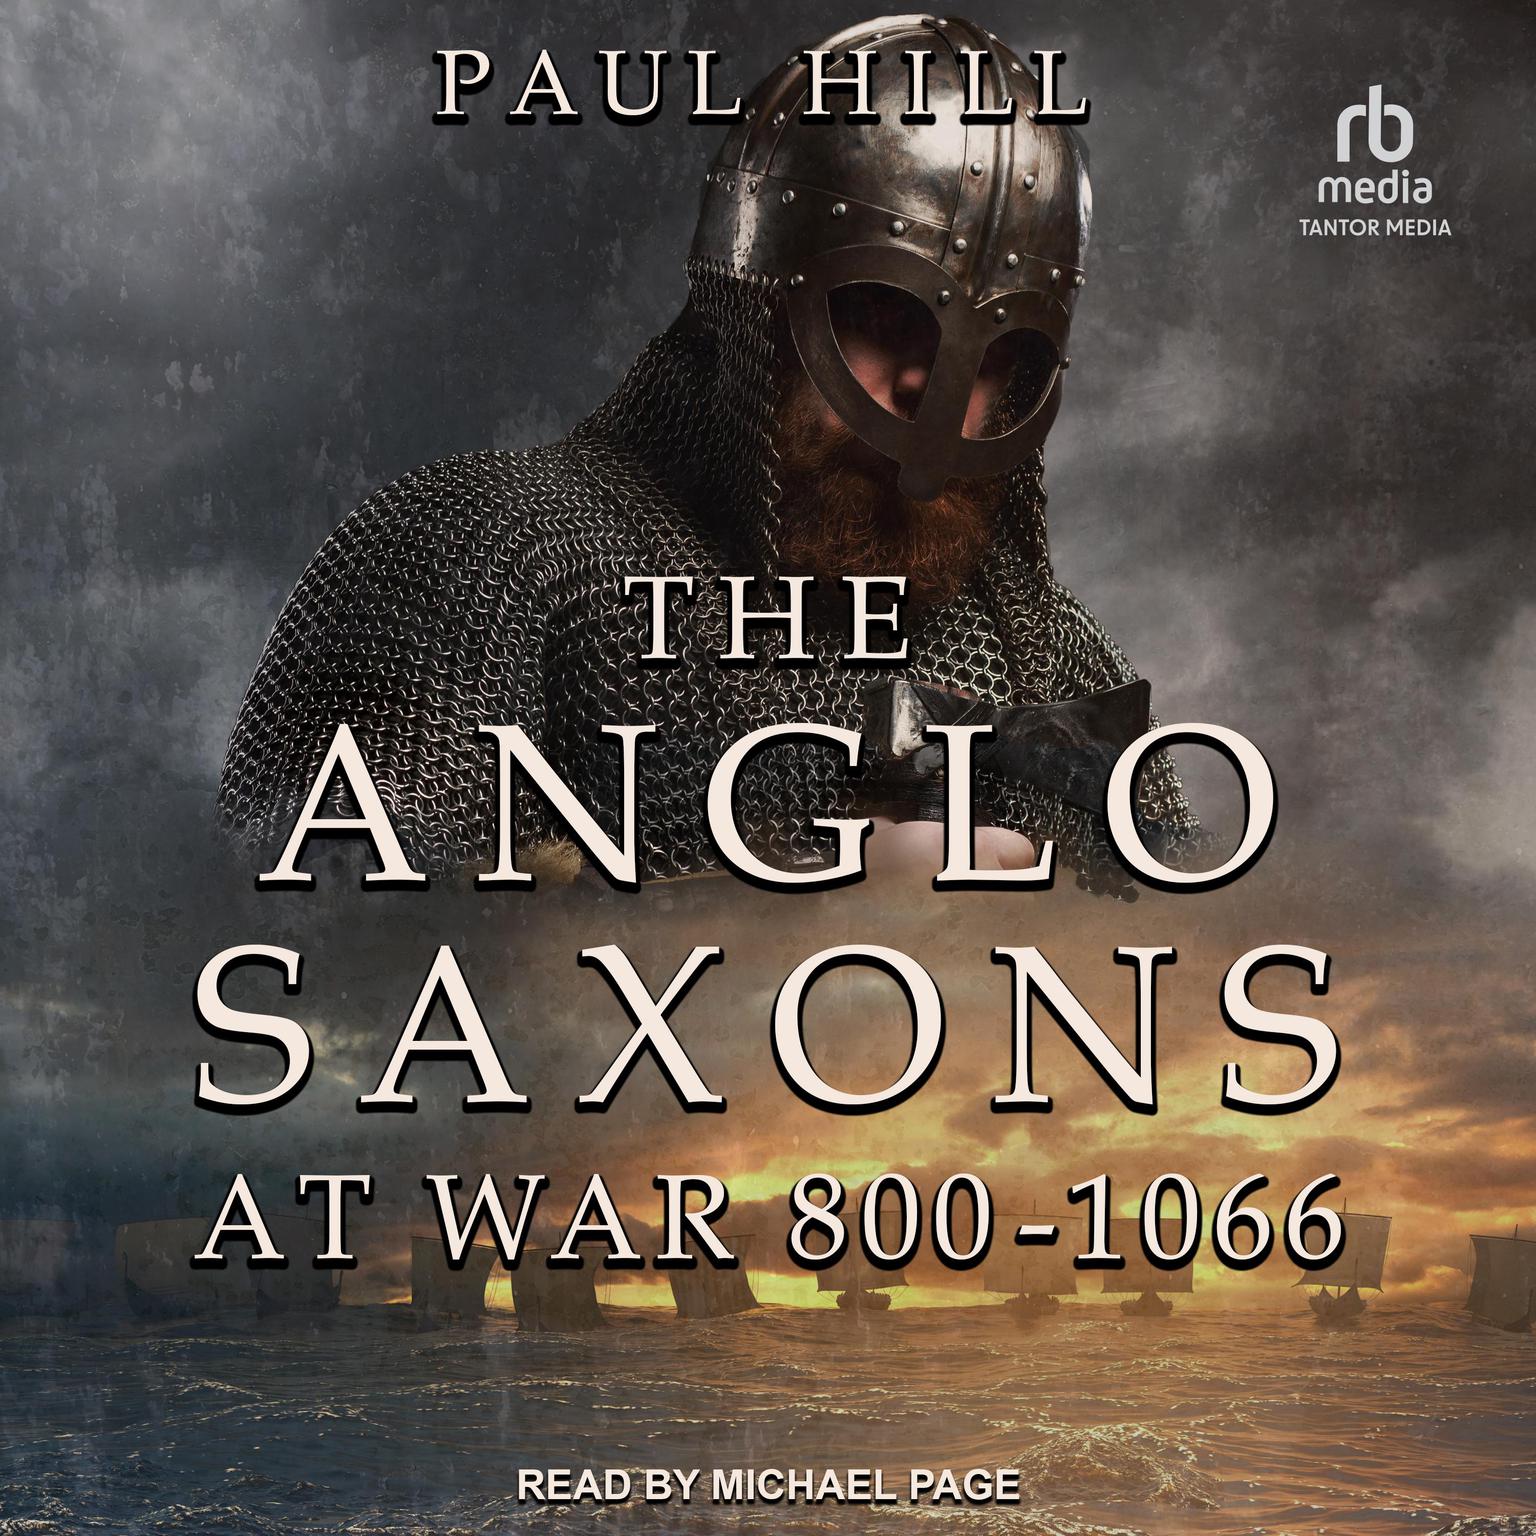 The Anglo-Saxons at War: 800-1066 Audiobook, by Paul Hill